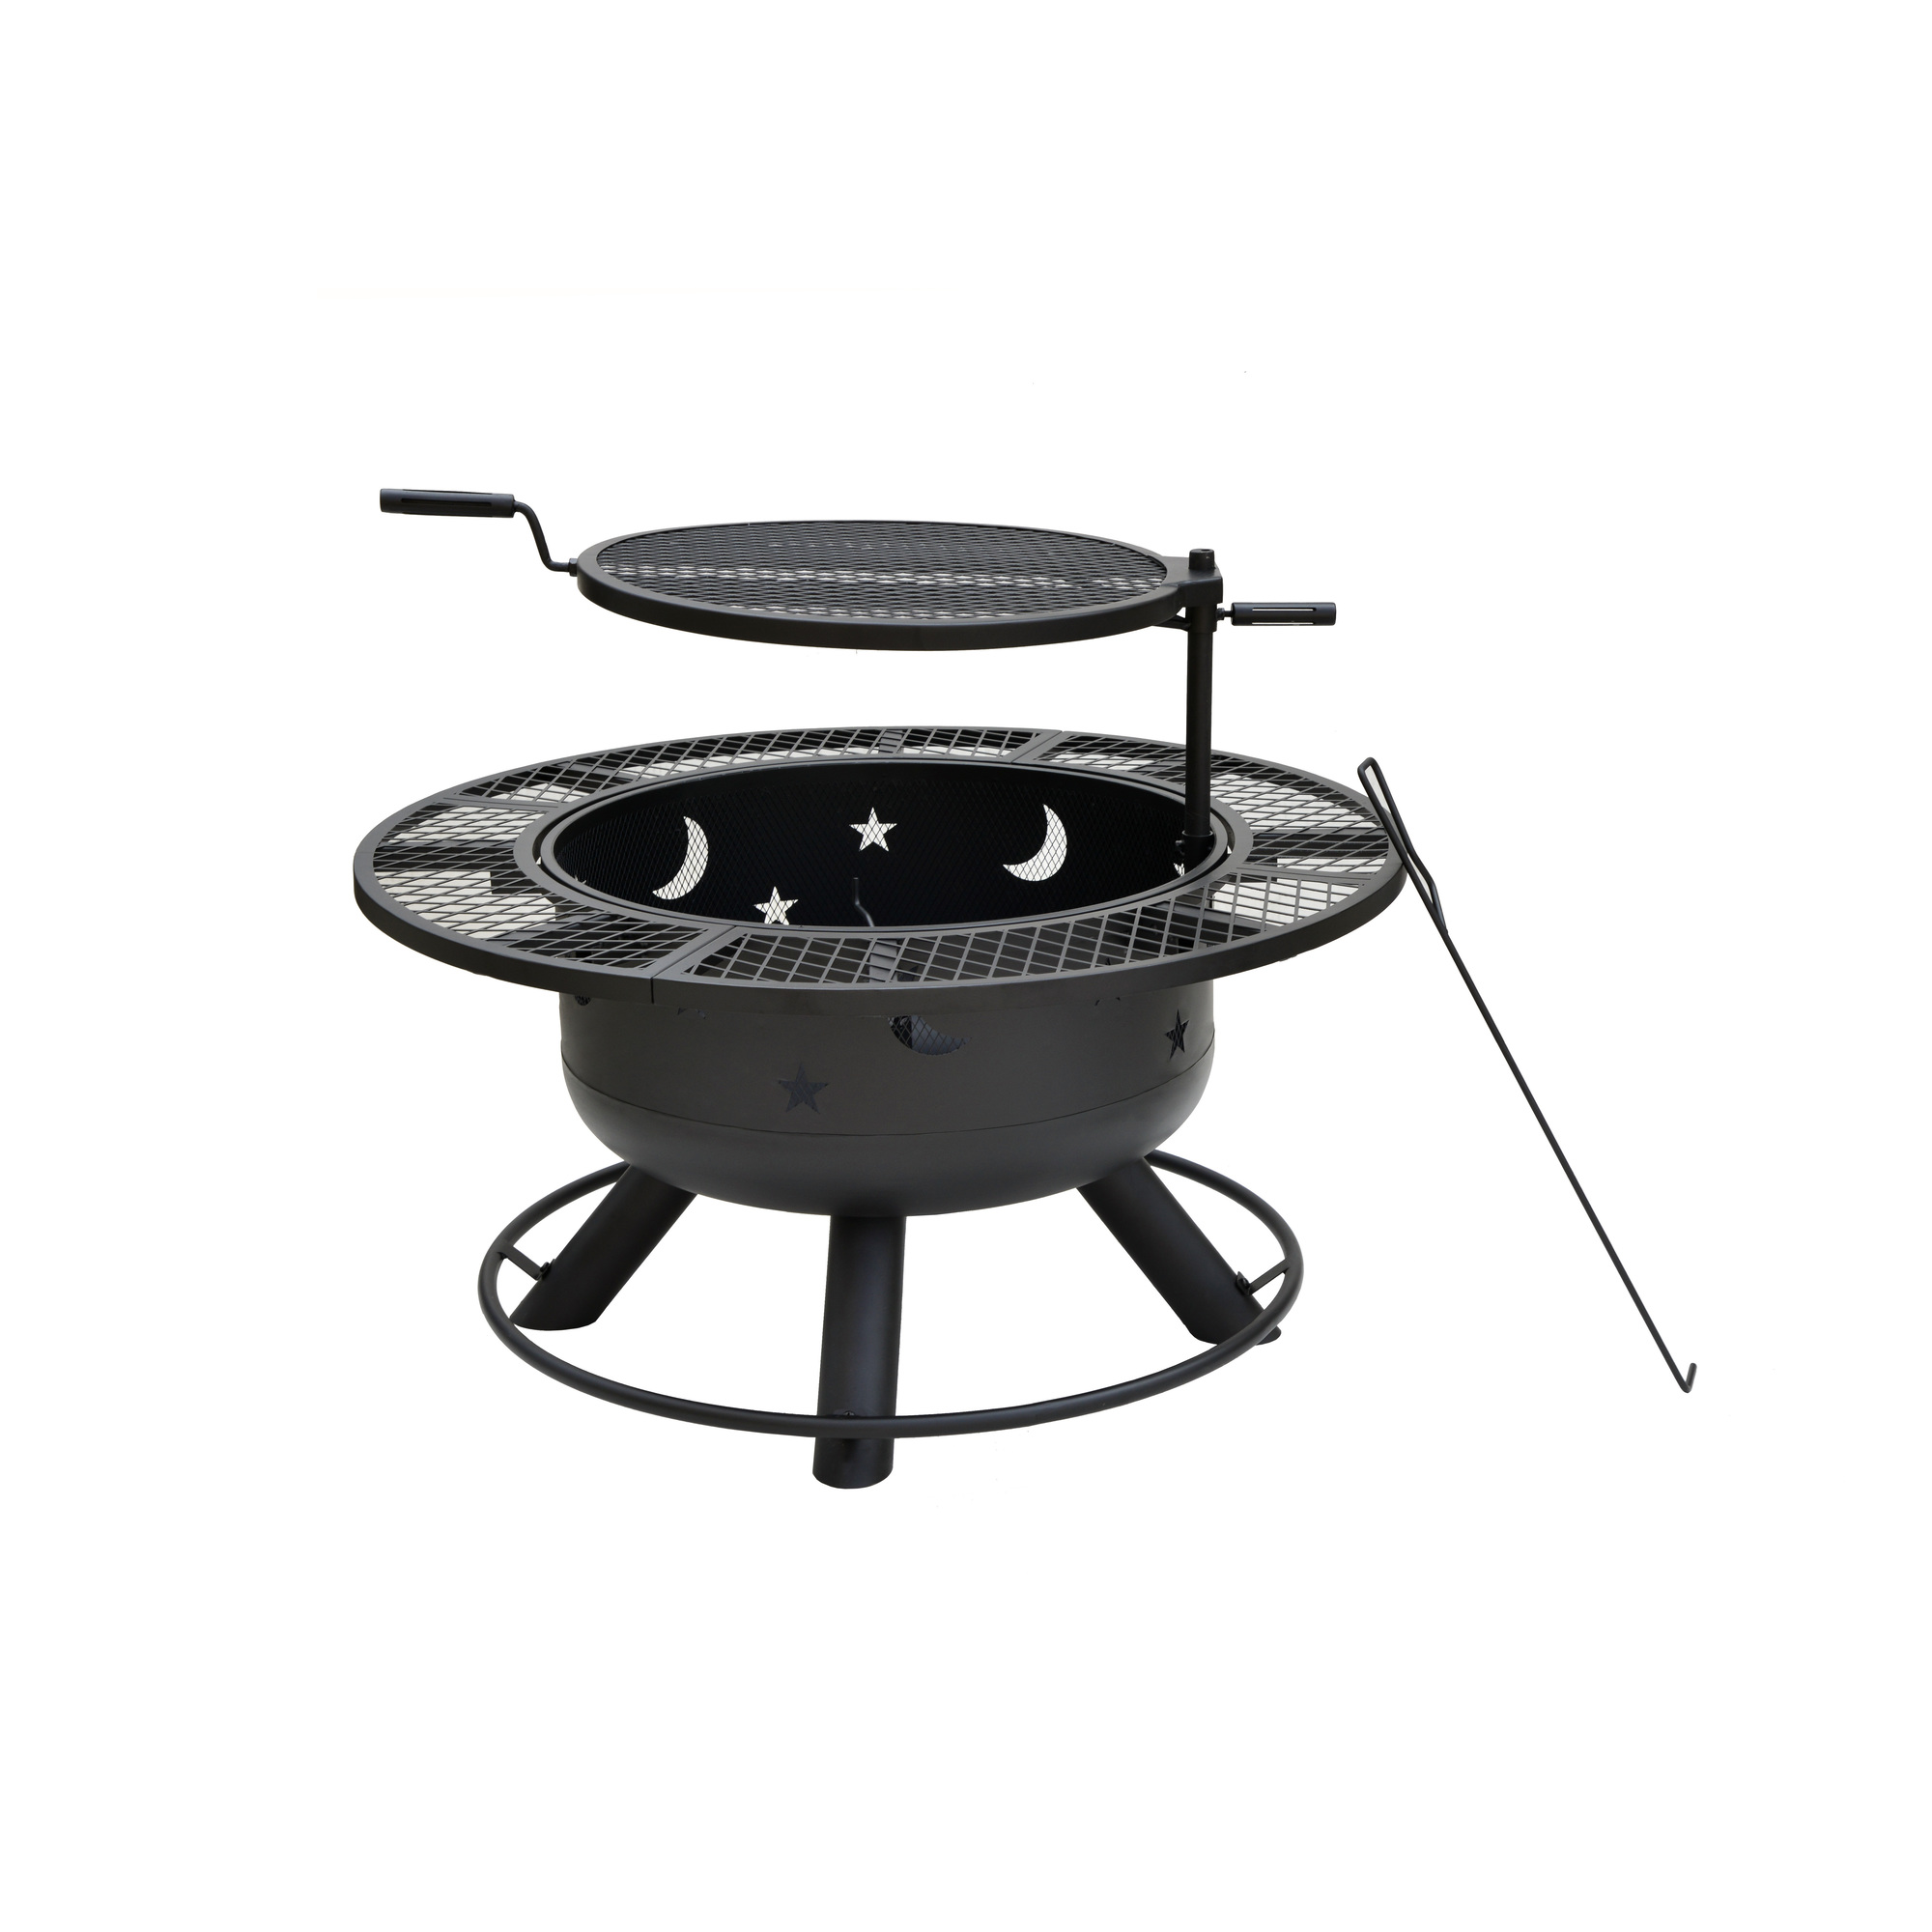 Bond, Nightstar 32.7Inch Fire Pit With Grill, Fuel Type Wood, Diameter 32.7 in, Material Combination, Model 52124